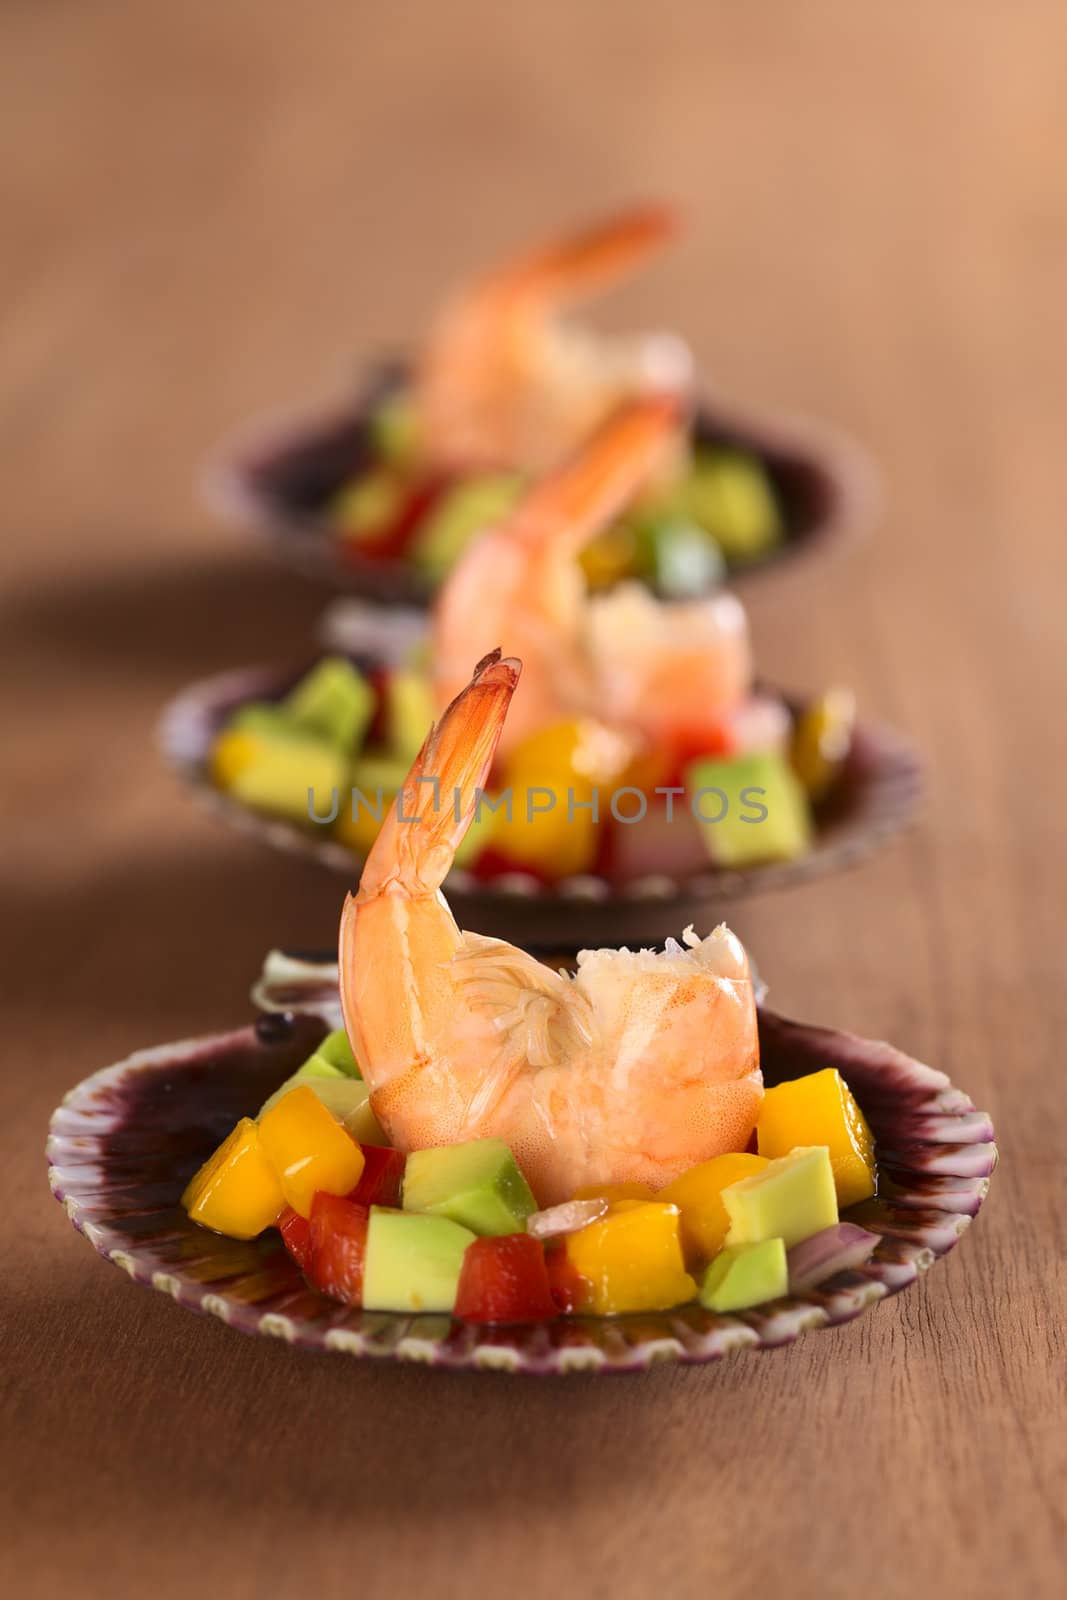 Fresh cooked king prawn with a mix of avocado, mango, red bell pepper, onions on scallop shells served as appetizer (Selective Focus, Focus on the prawn in the front)